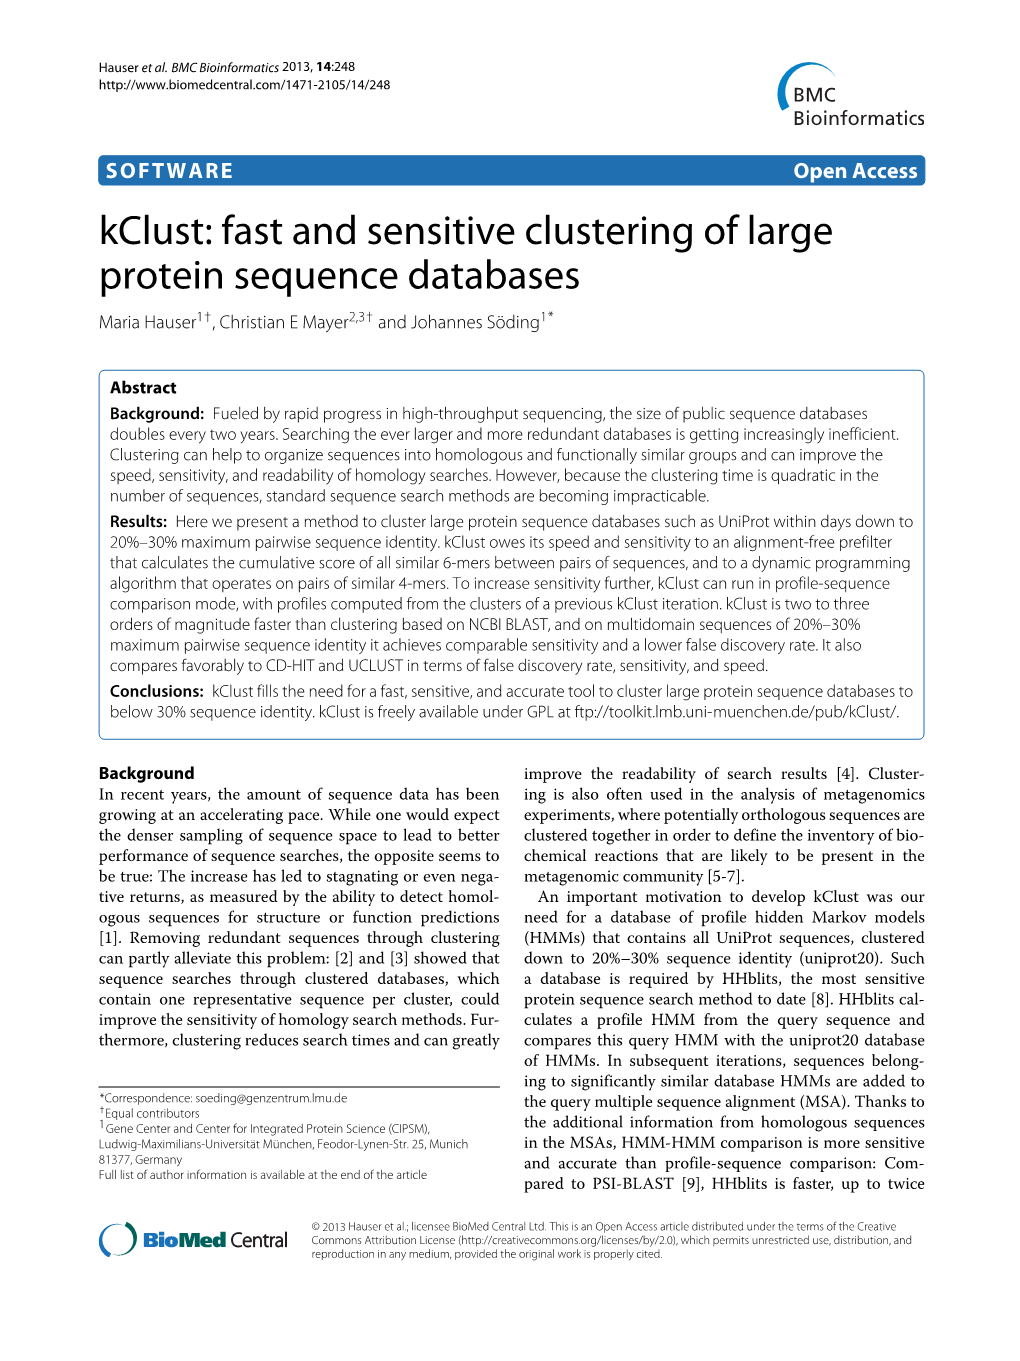 Kclust: Fast and Sensitive Clustering of Large Protein Sequence Databases Maria Hauser1†, Christian E Mayer2,3† and Johannes Söding1*